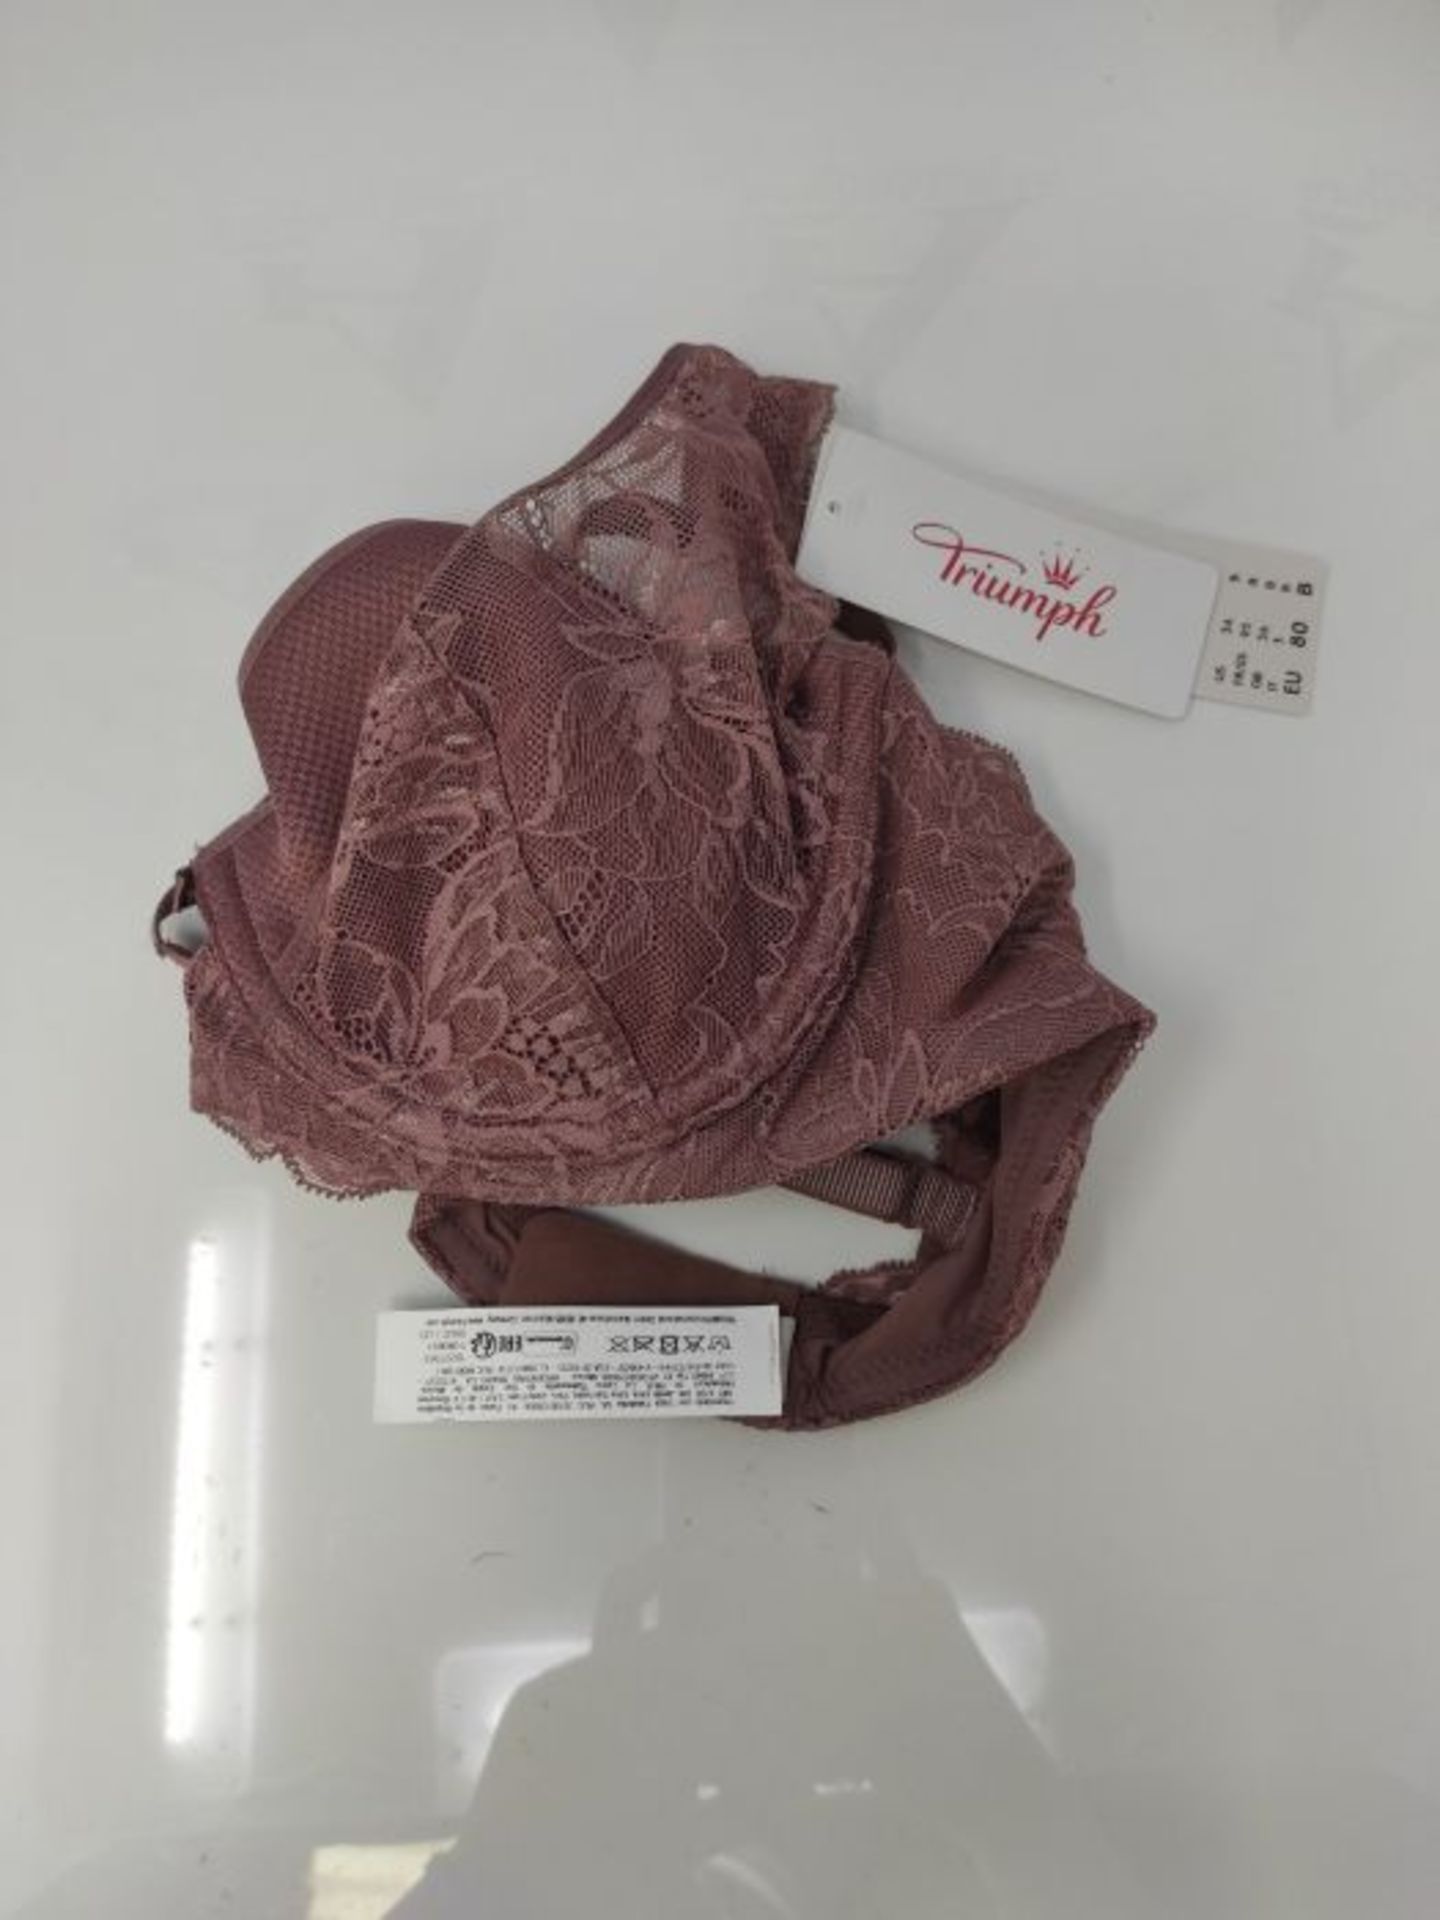 Triumph Women's Amourette Charm WP03 Wired Padded Bra, Rose Brown, 36B - Image 2 of 3